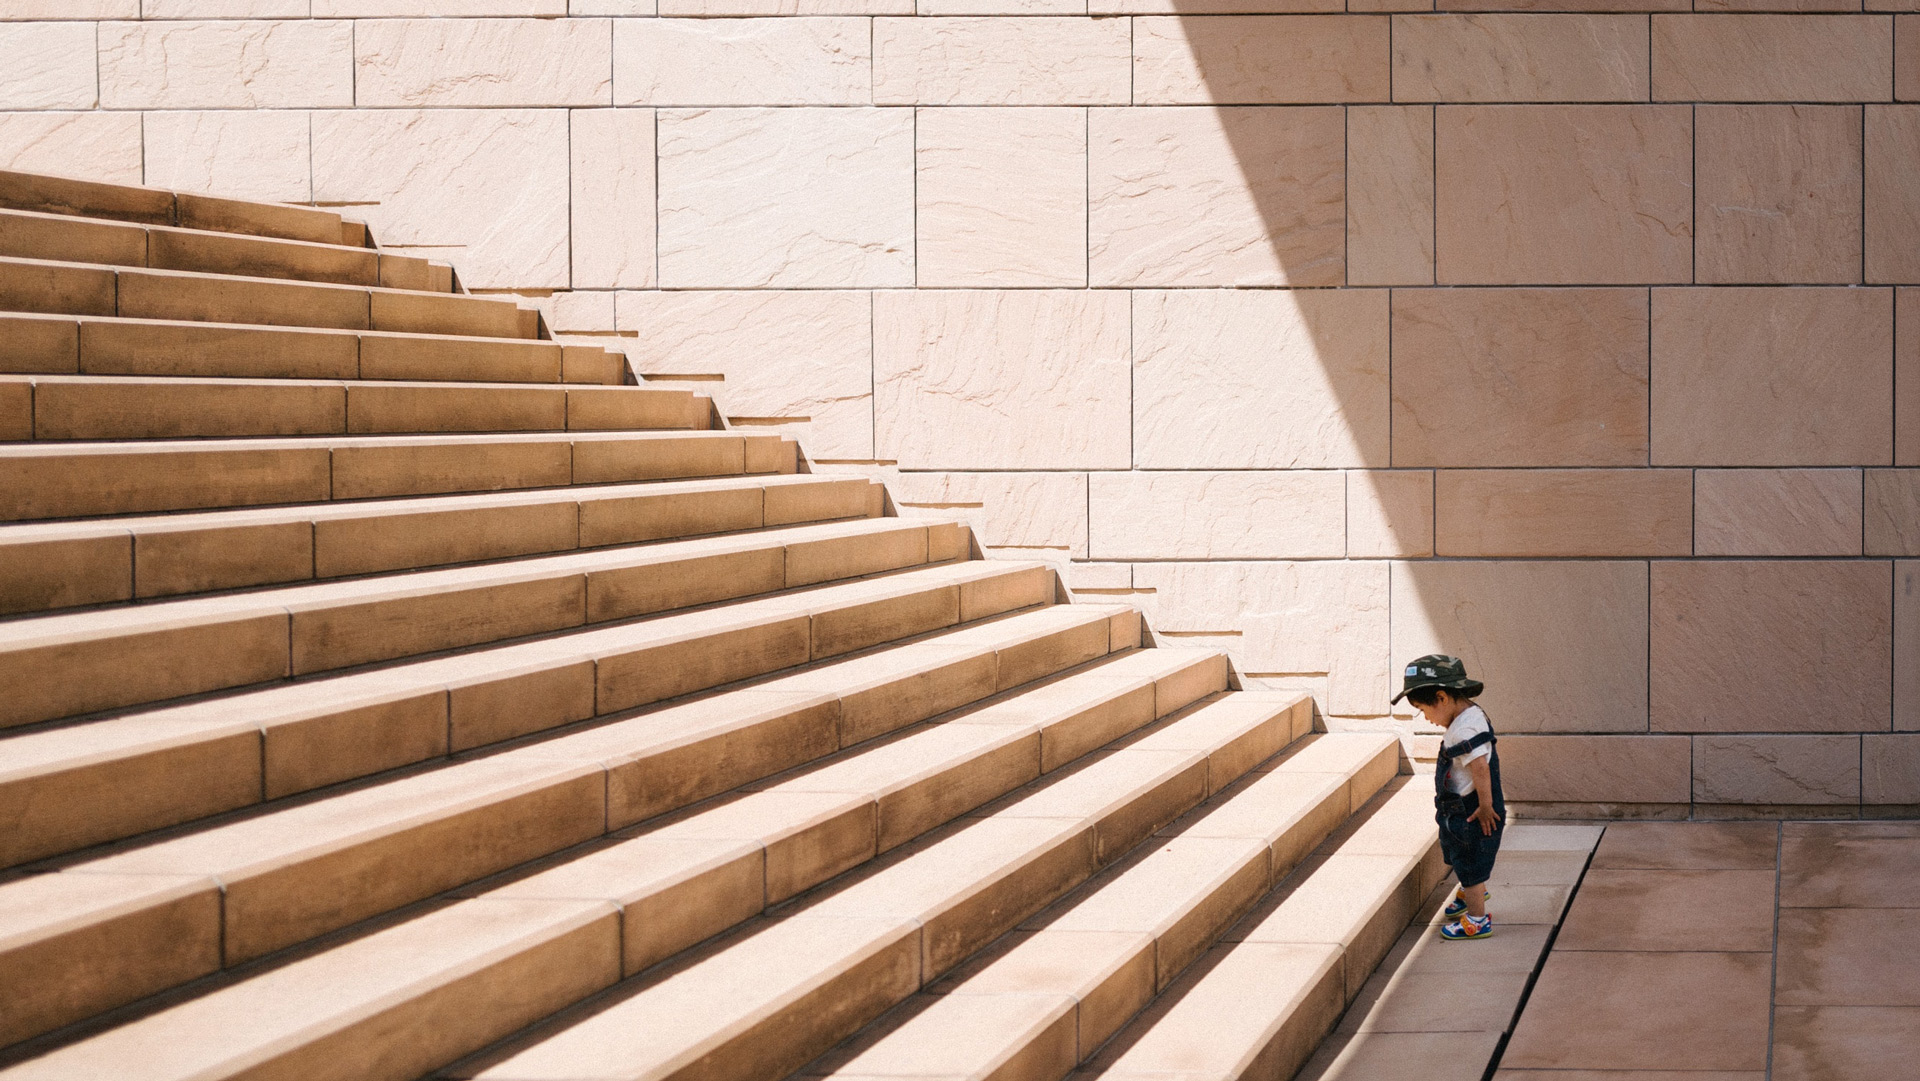 Young boy standing at the beginning of stairs, looking down at the first step (Jukan Tateisi- Unsplash.com)